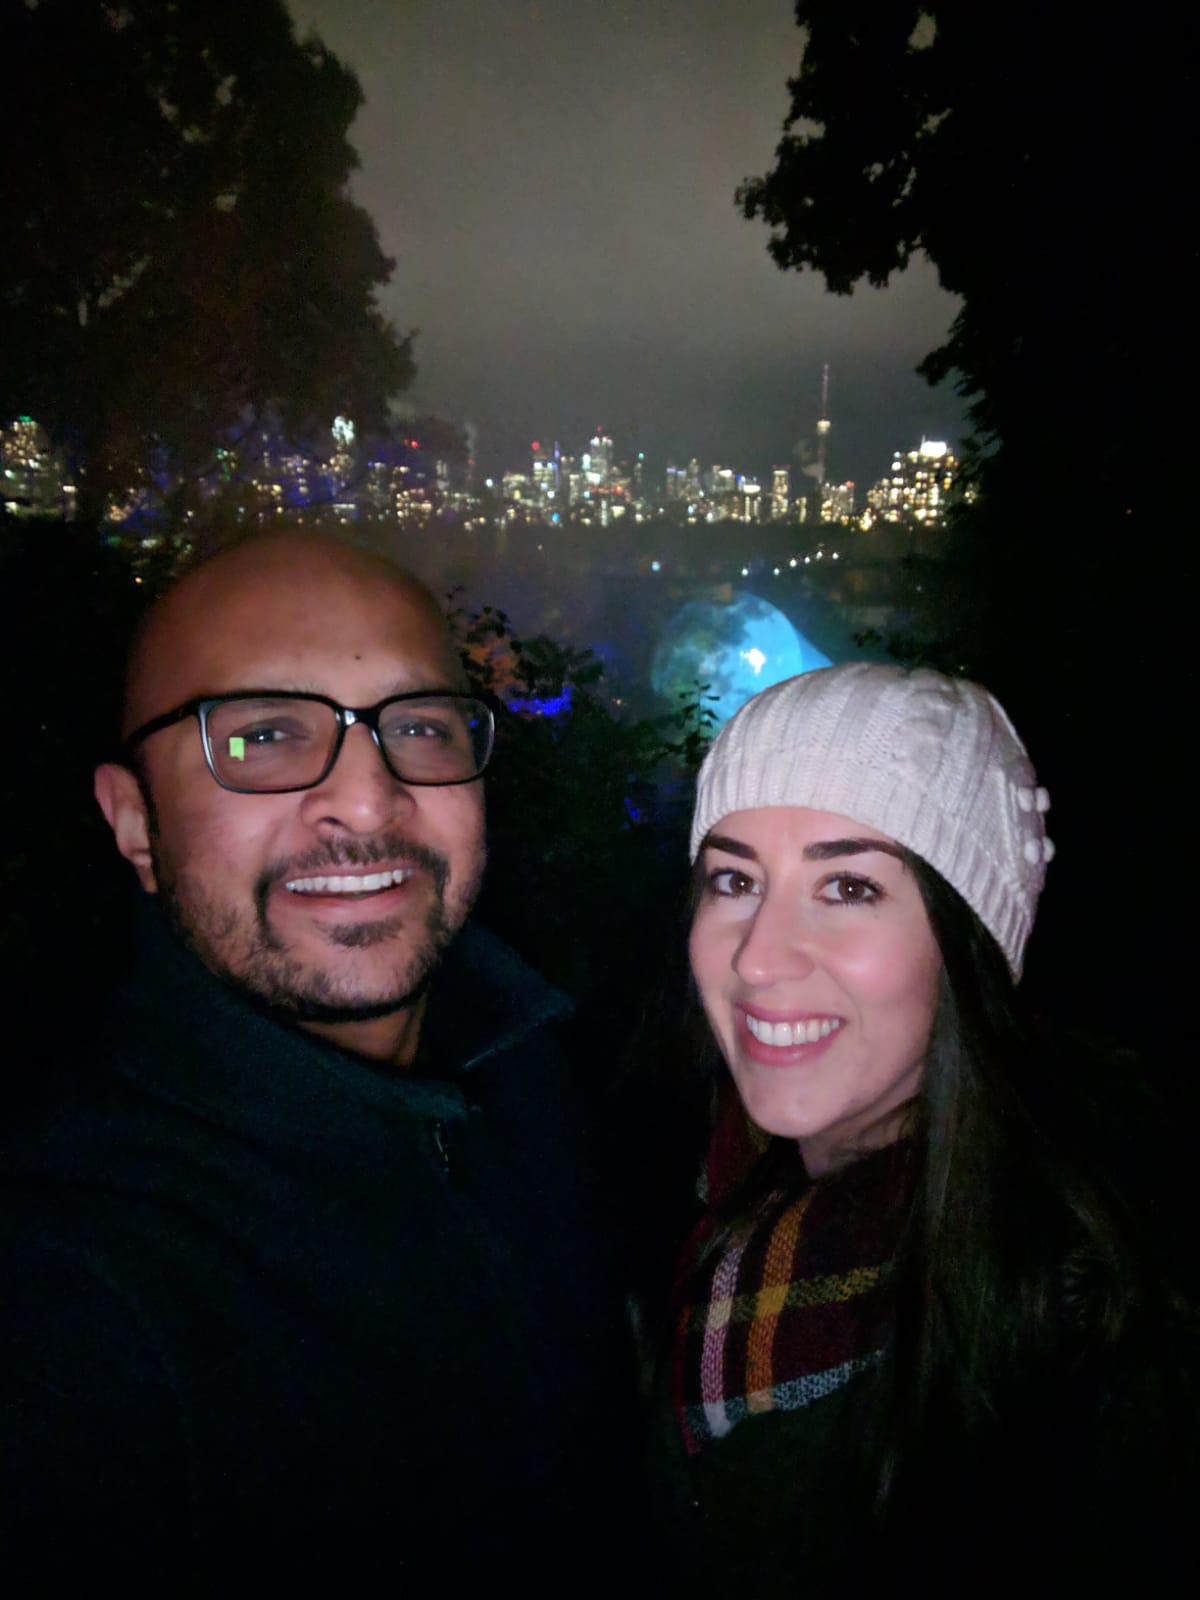 Melissa and her partner in coats smiling at the camera. She is also wearing a white toque and a scarf. They are in front of the Toronto city skyline at night.